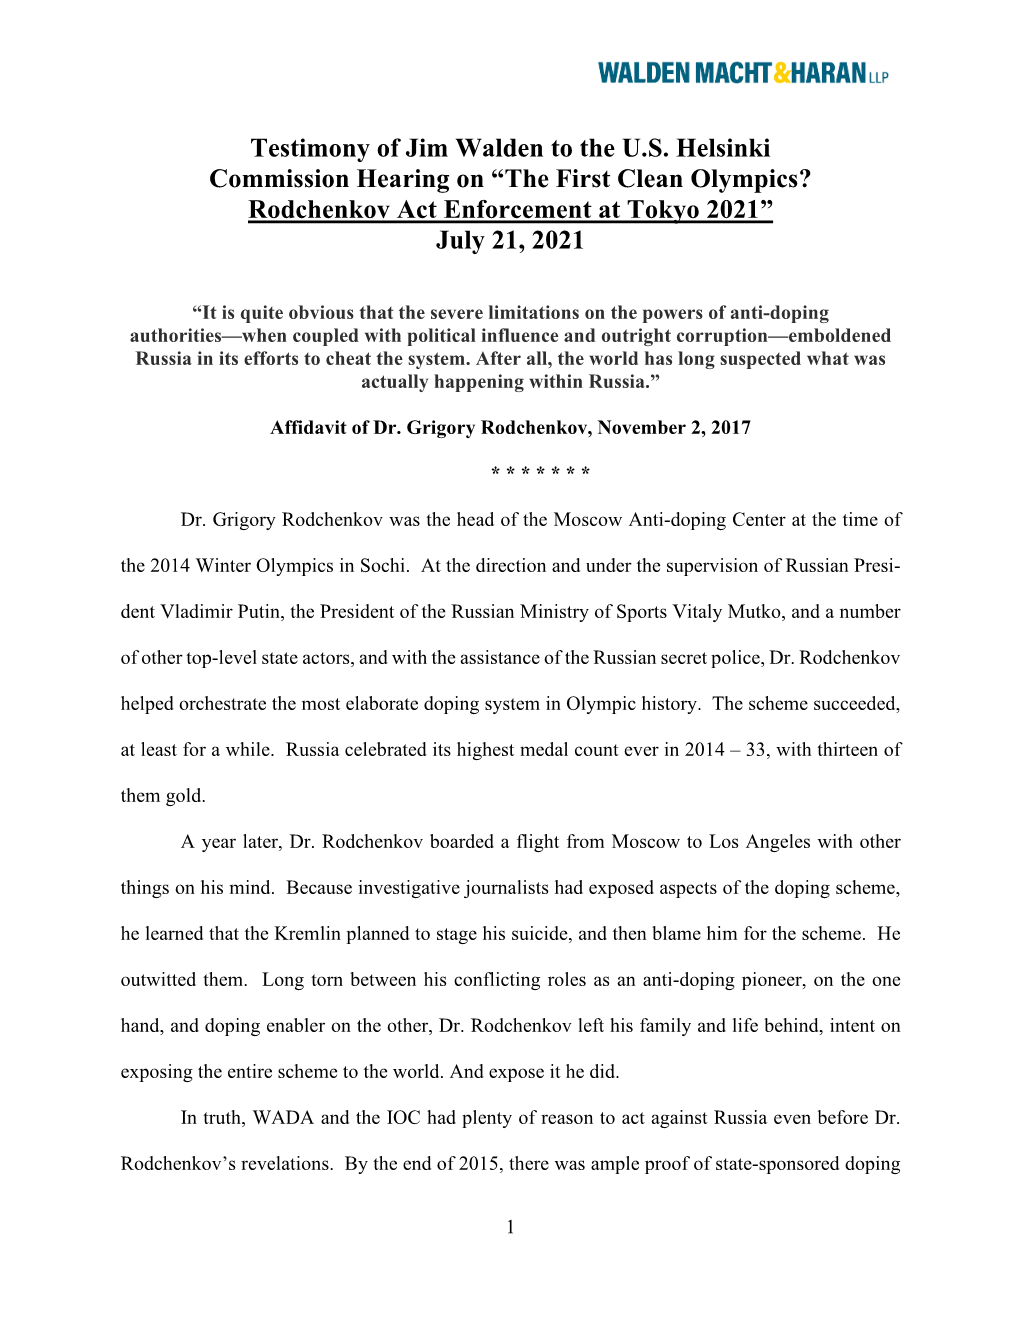 Testimony of Jim Walden to the U.S. Helsinki Commission Hearing on “The First Clean Olympics? Rodchenkov Act Enforcement at Tokyo 2021” July 21, 2021